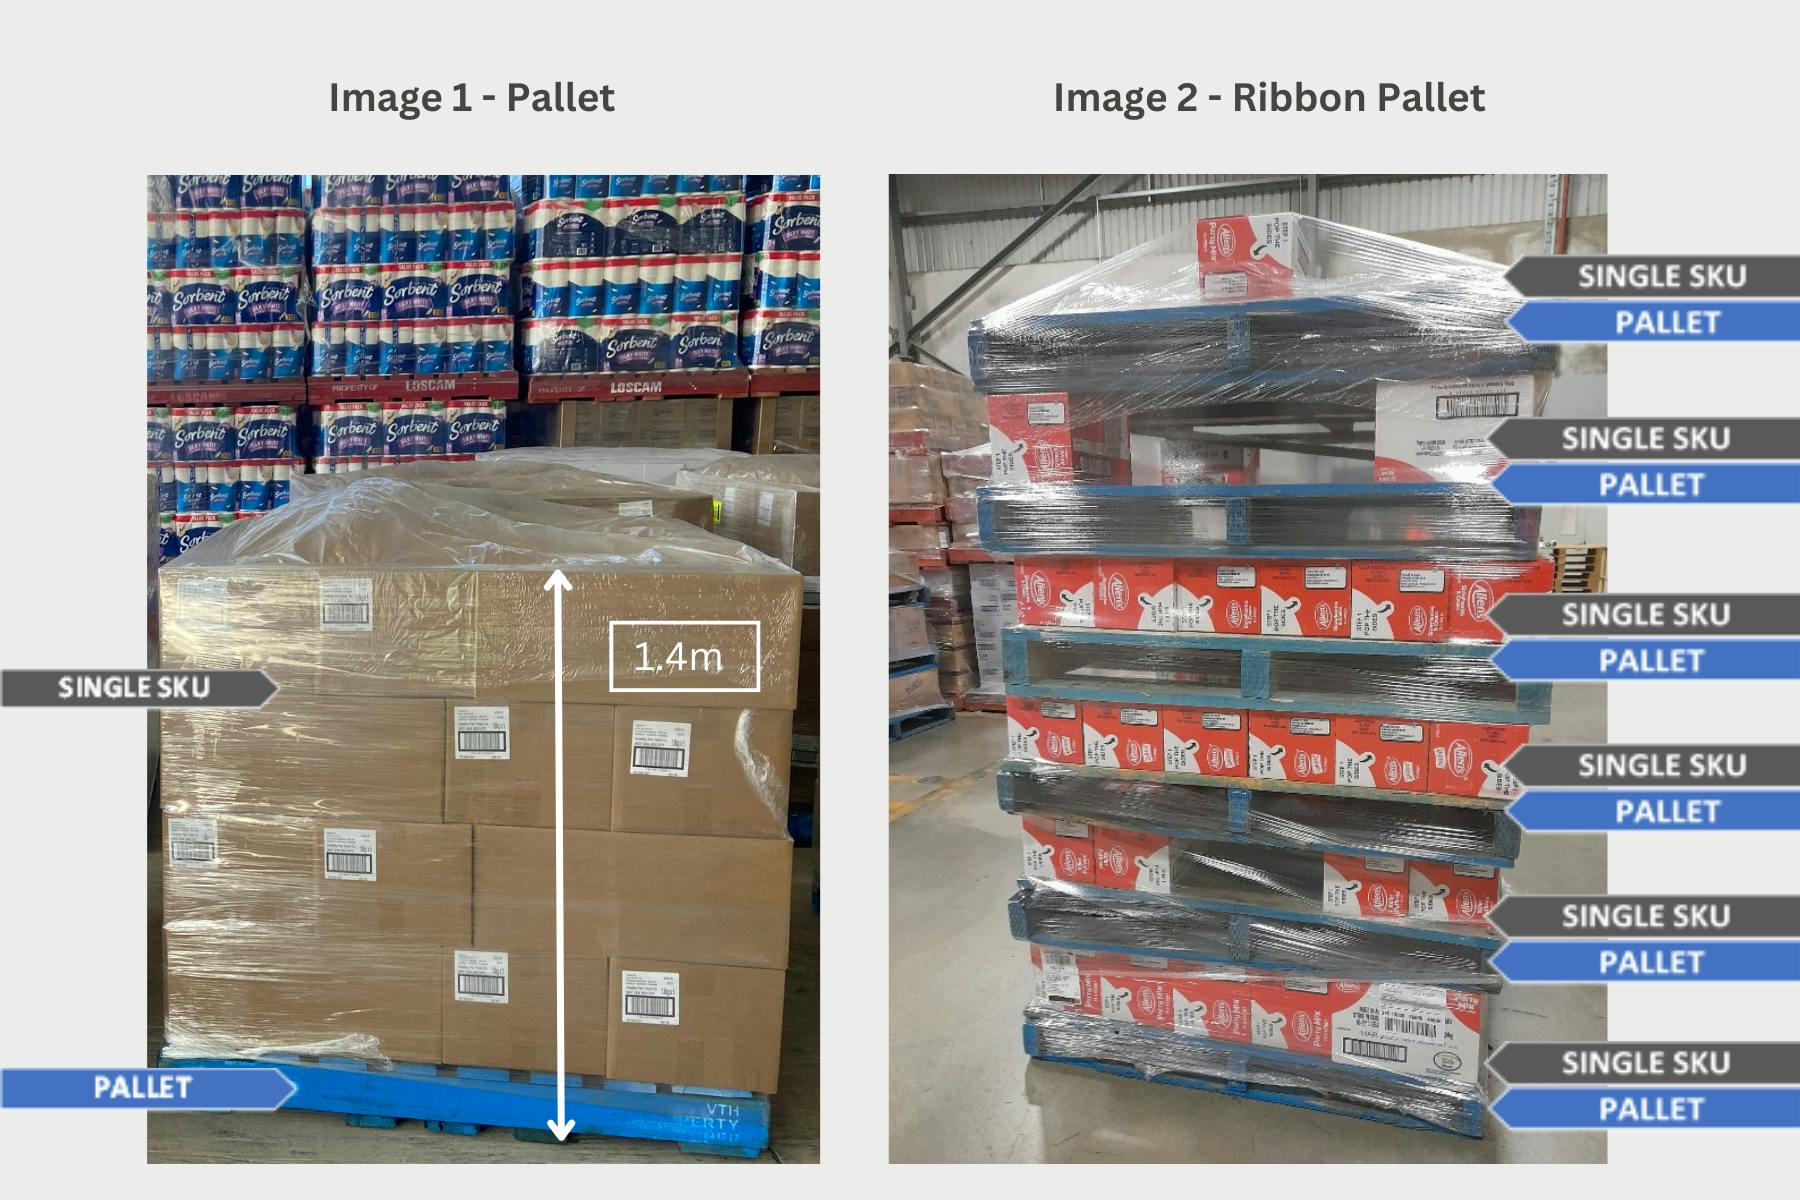 Pallet and Ribbon Pallet